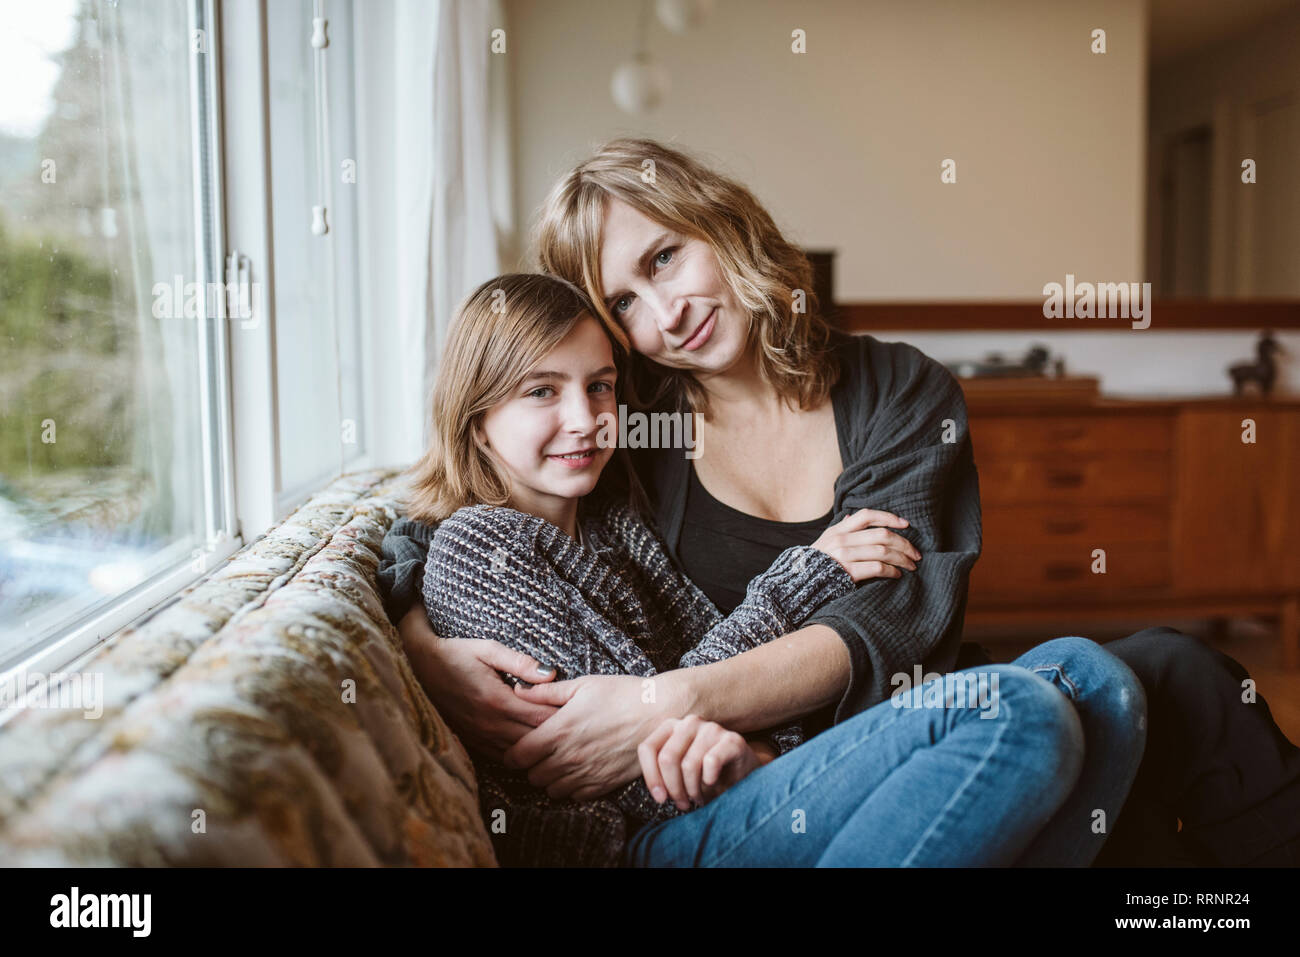 Portrait affectionate mother and daughter cuddling on living room sofa Stock Photo